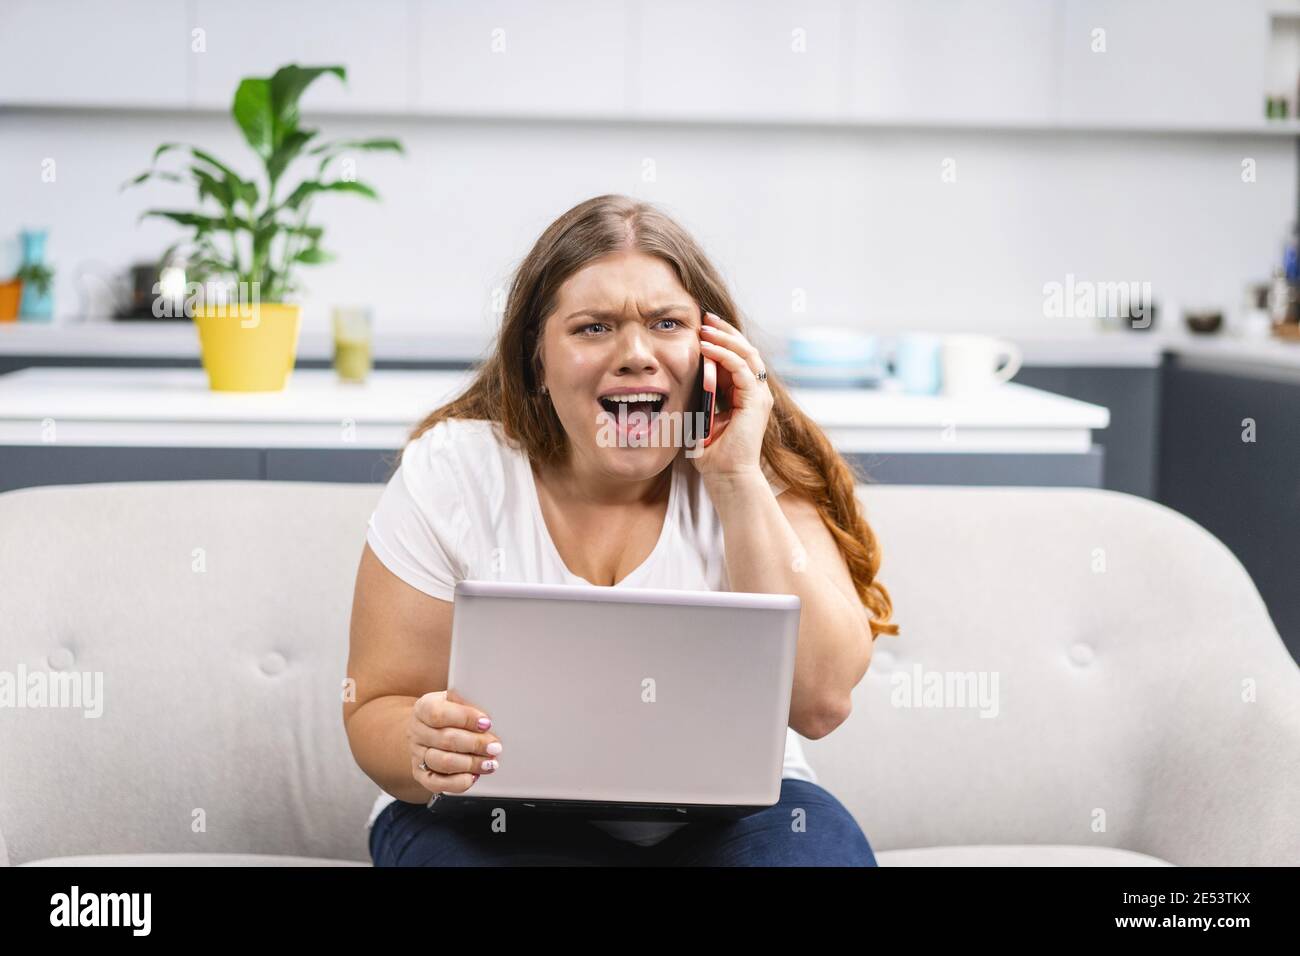 Mad screaming talking on the phone young fat girl working on laptop sitting on the sofa at home with the kitchen on background. Self acceptance Stock Photo